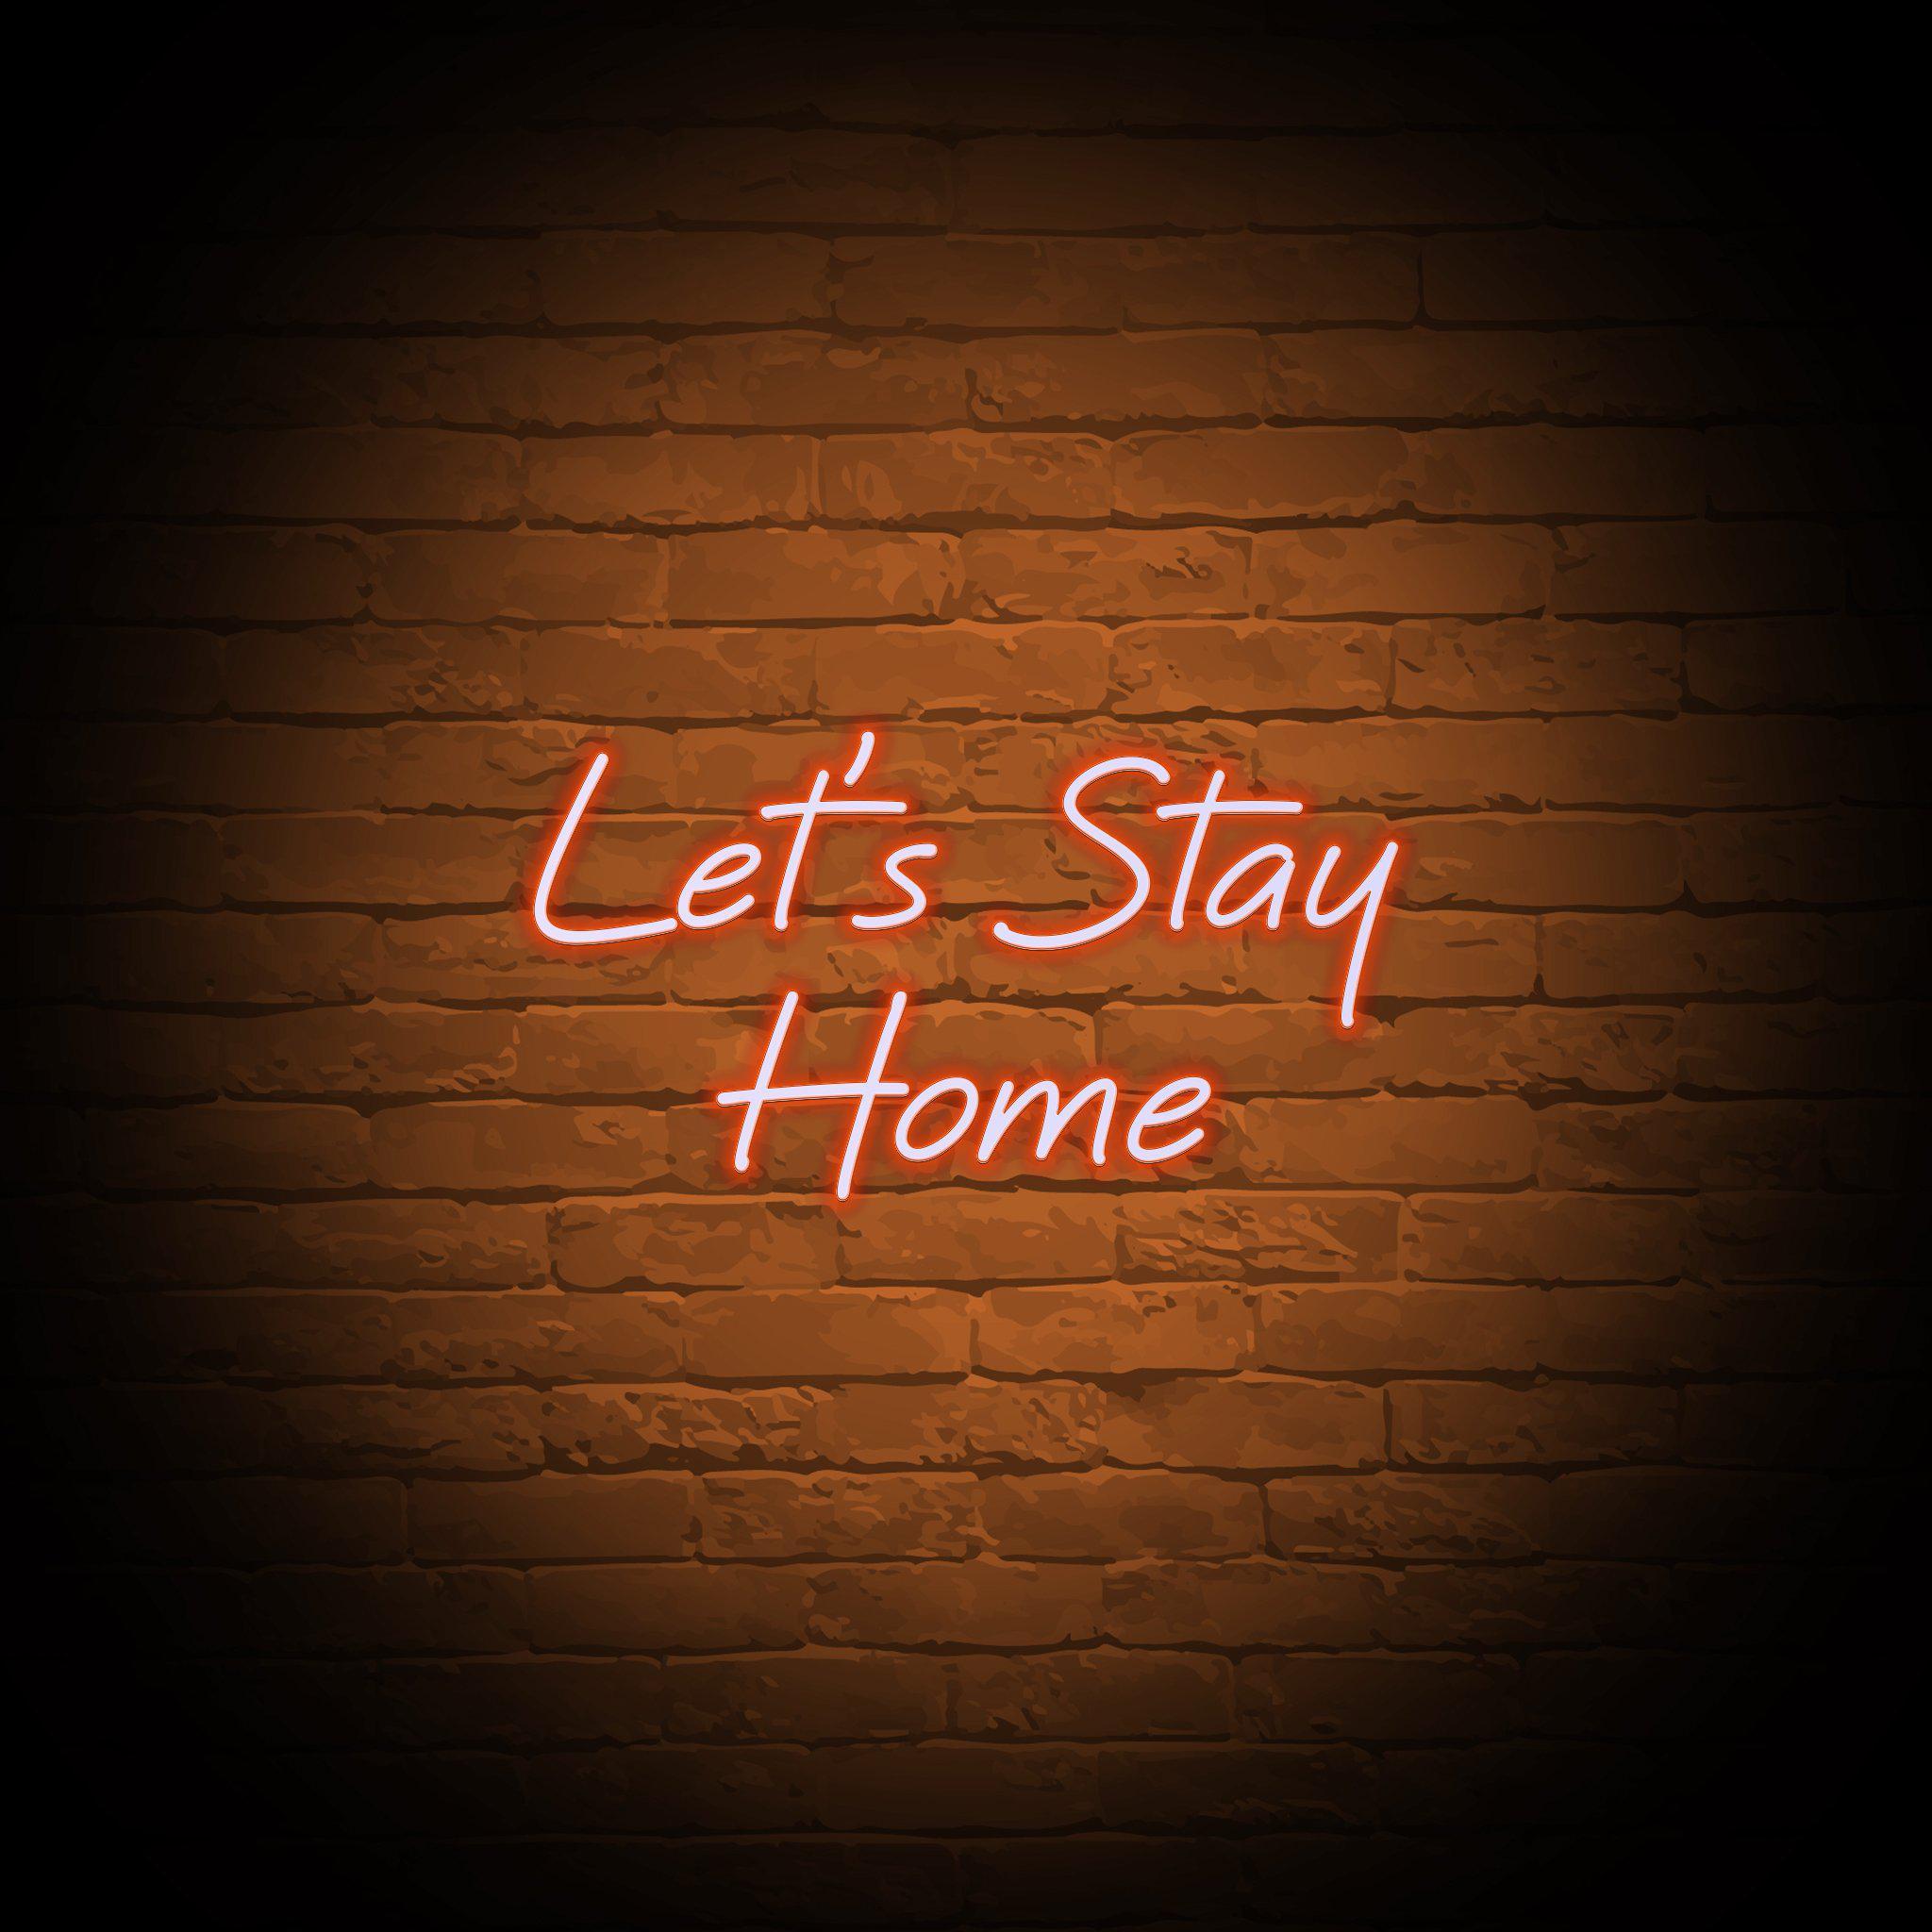 'LET'S STAY HOME' NEON SIGN - NeonFerry